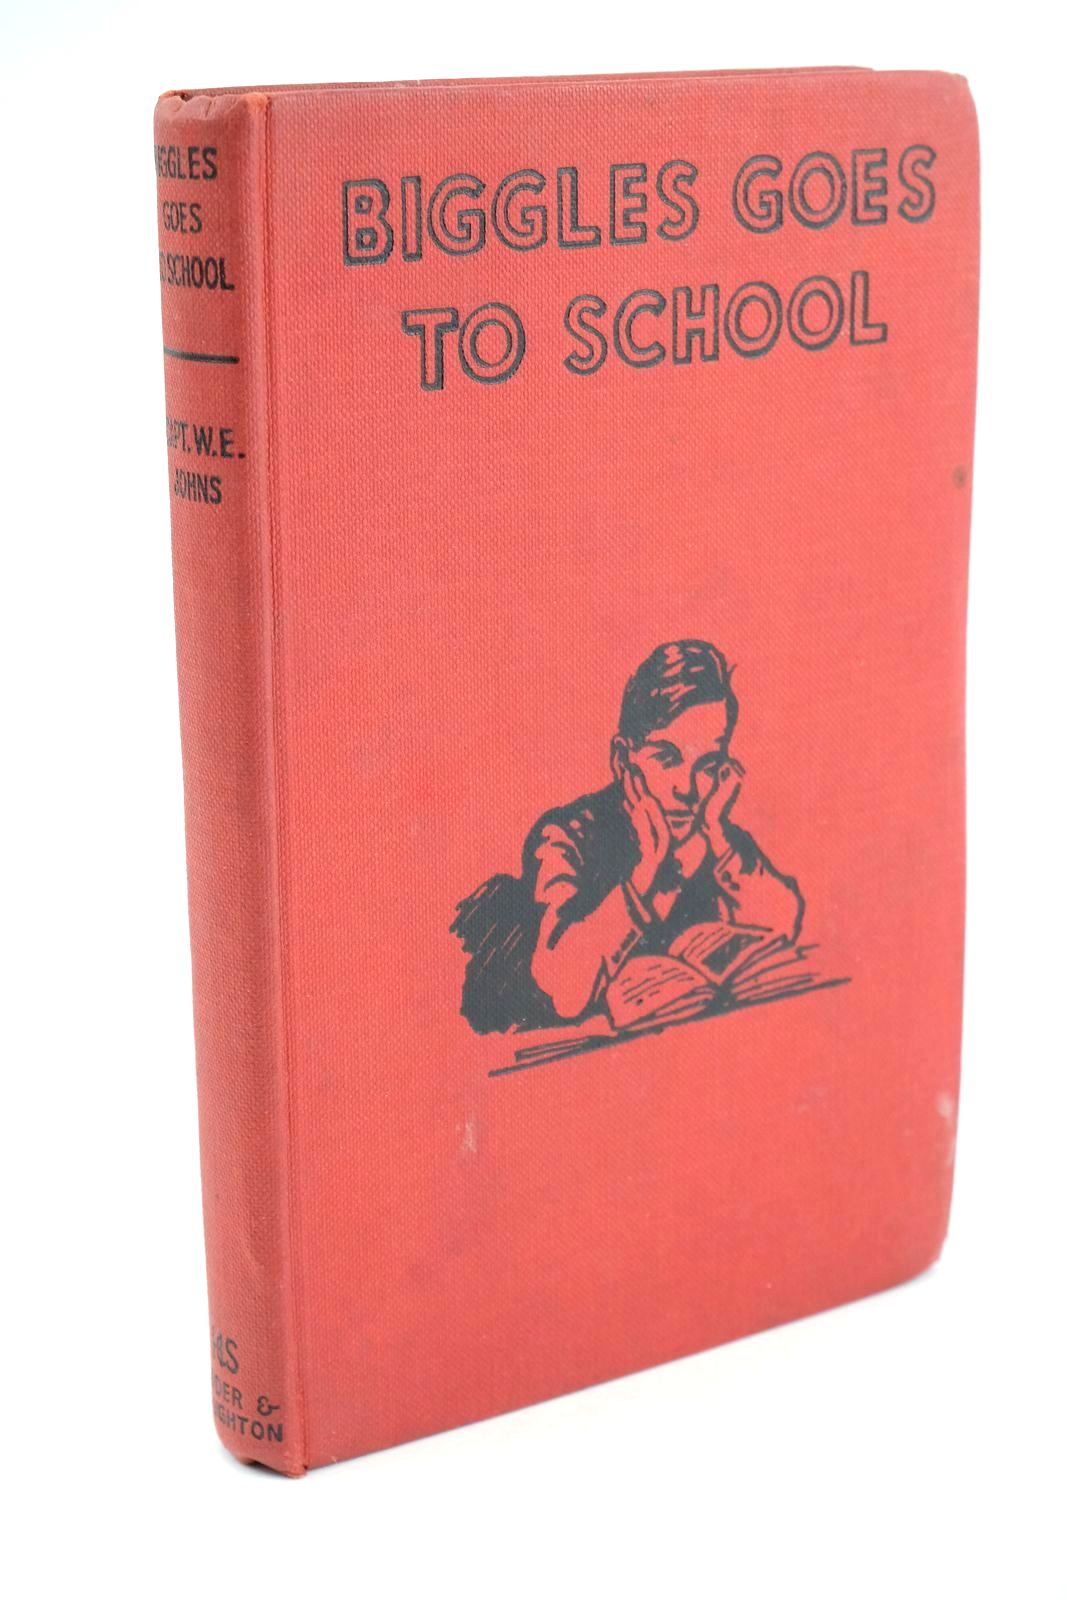 Photo of BIGGLES GOES TO SCHOOL written by Johns, W.E. illustrated by Stead,  published by Hodder &amp; Stoughton (STOCK CODE: 1324855)  for sale by Stella & Rose's Books